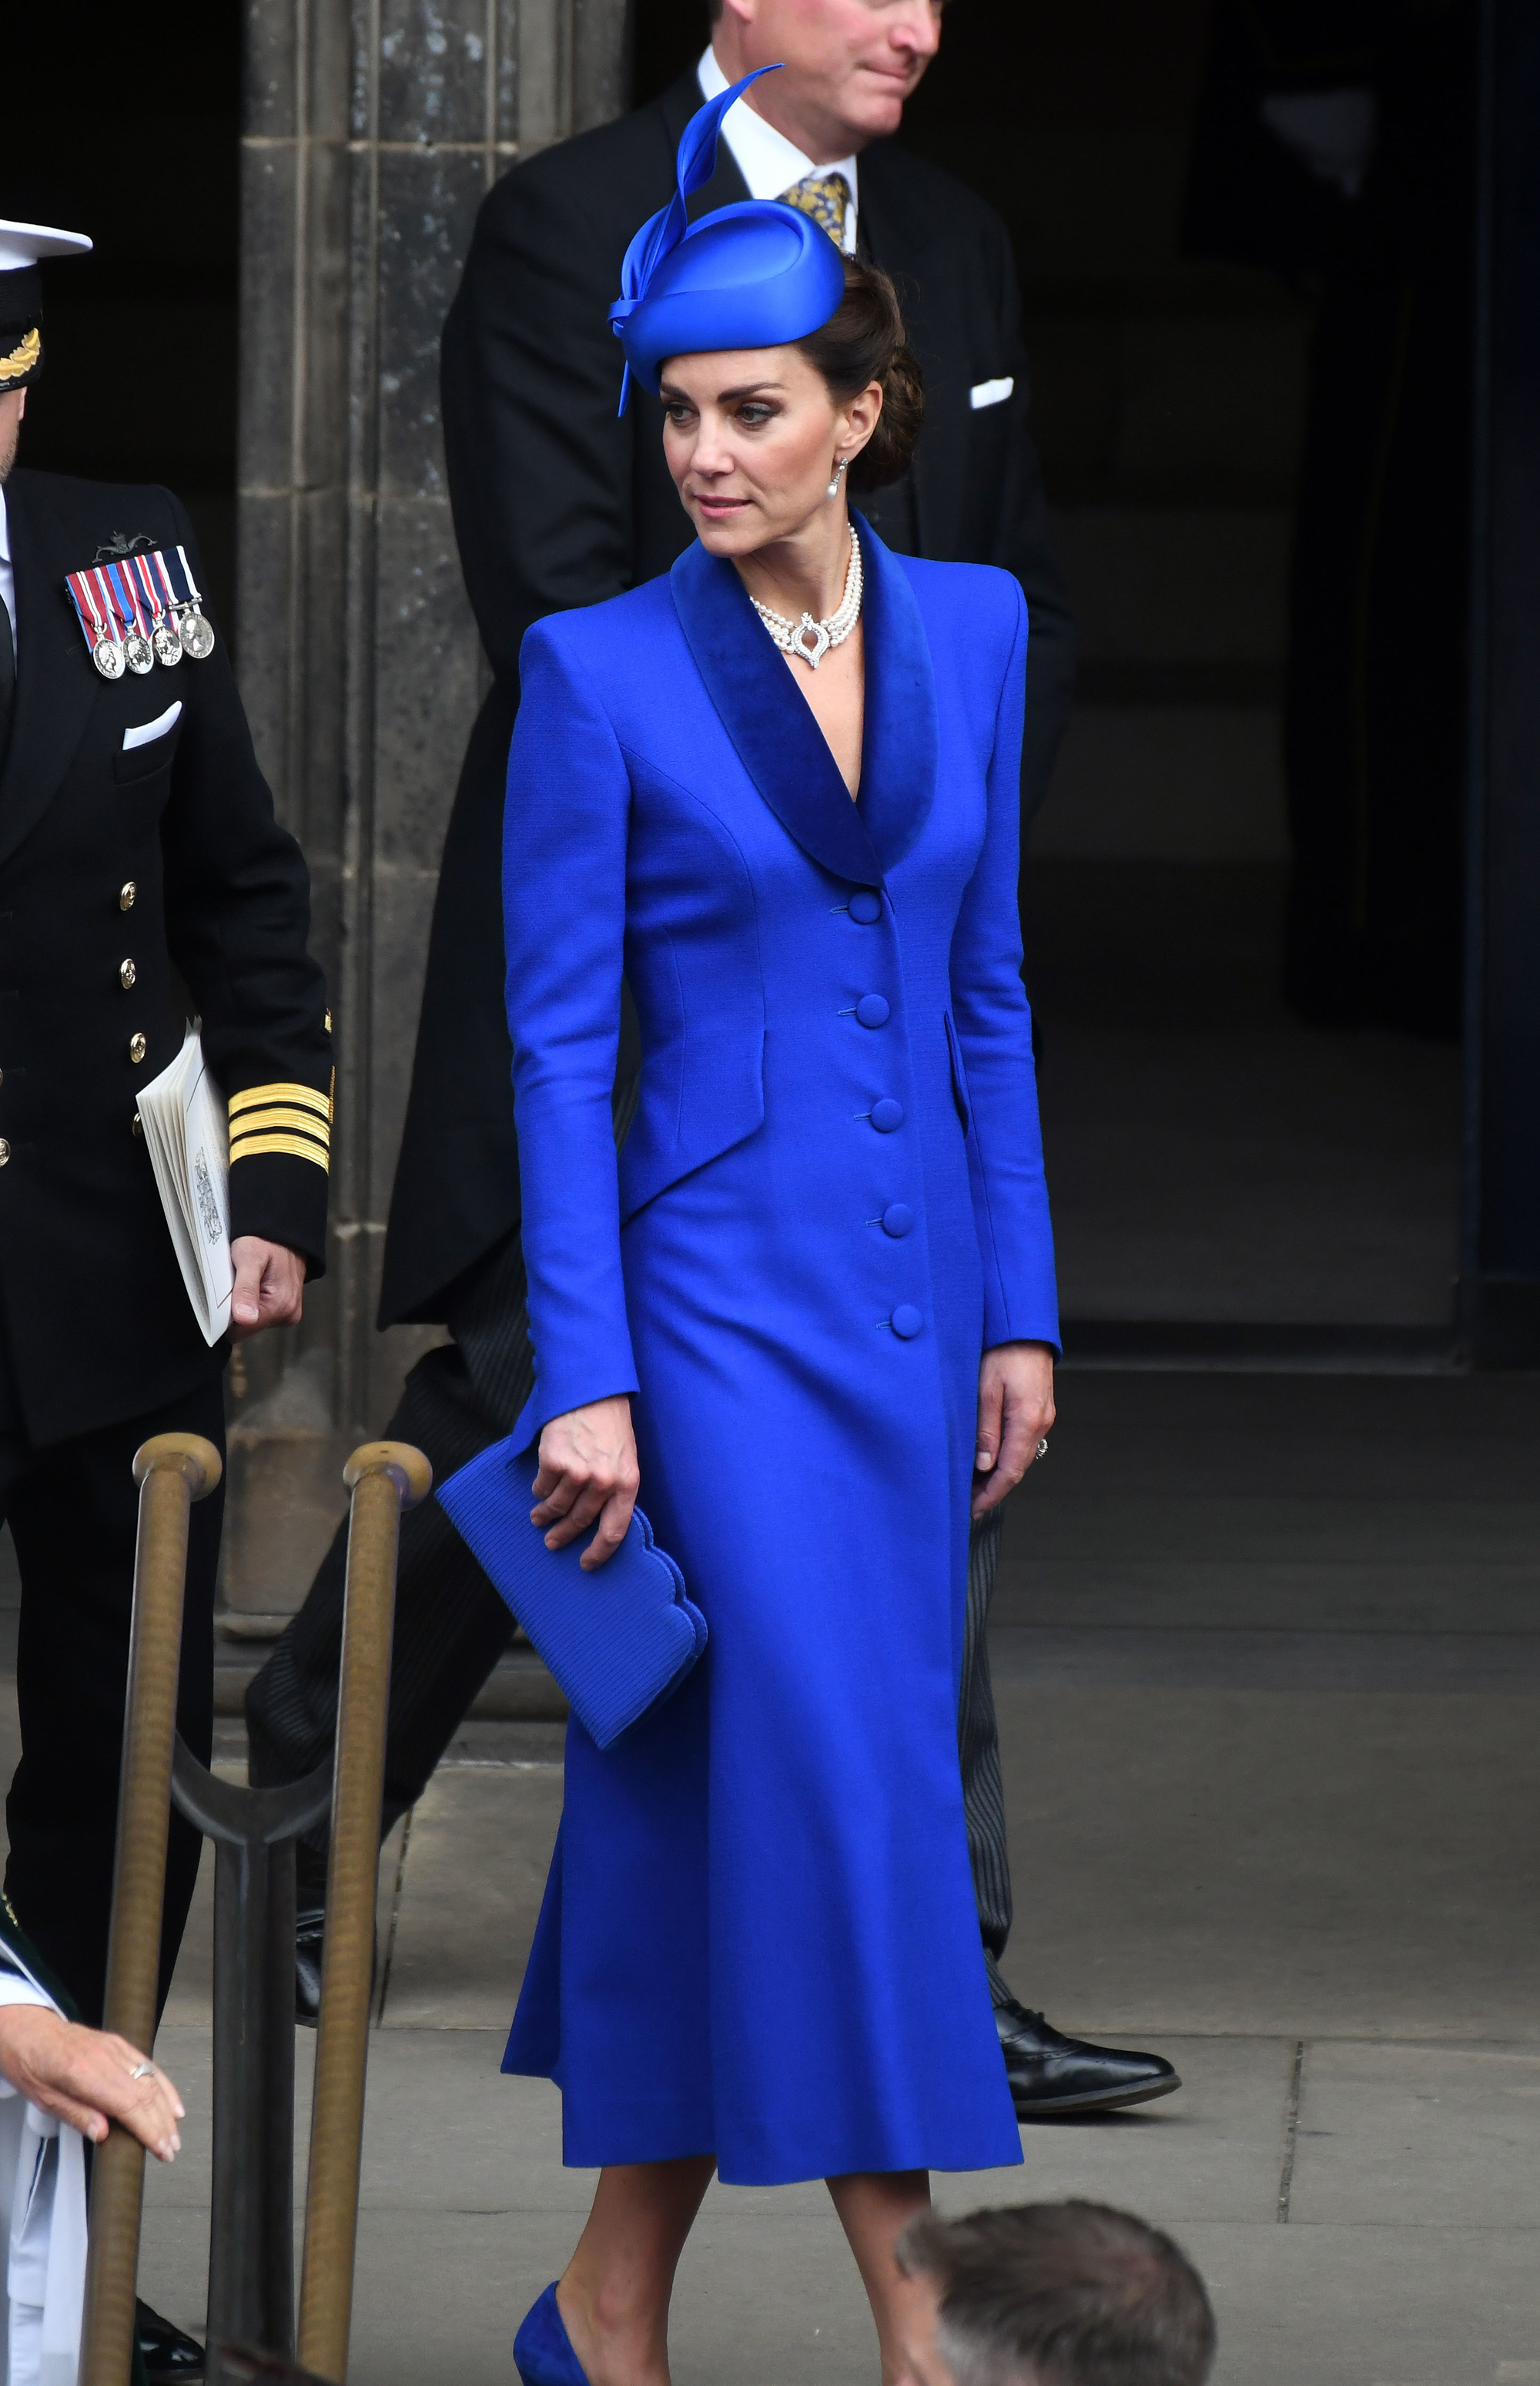 The Princess of Wales, known as the Duchess of Rothesay while in Scotland, leaves St Giles' Cathedral, Edinburgh, following the National Service of Thanksgiving and Dedication for King Charles III and Queen Camilla